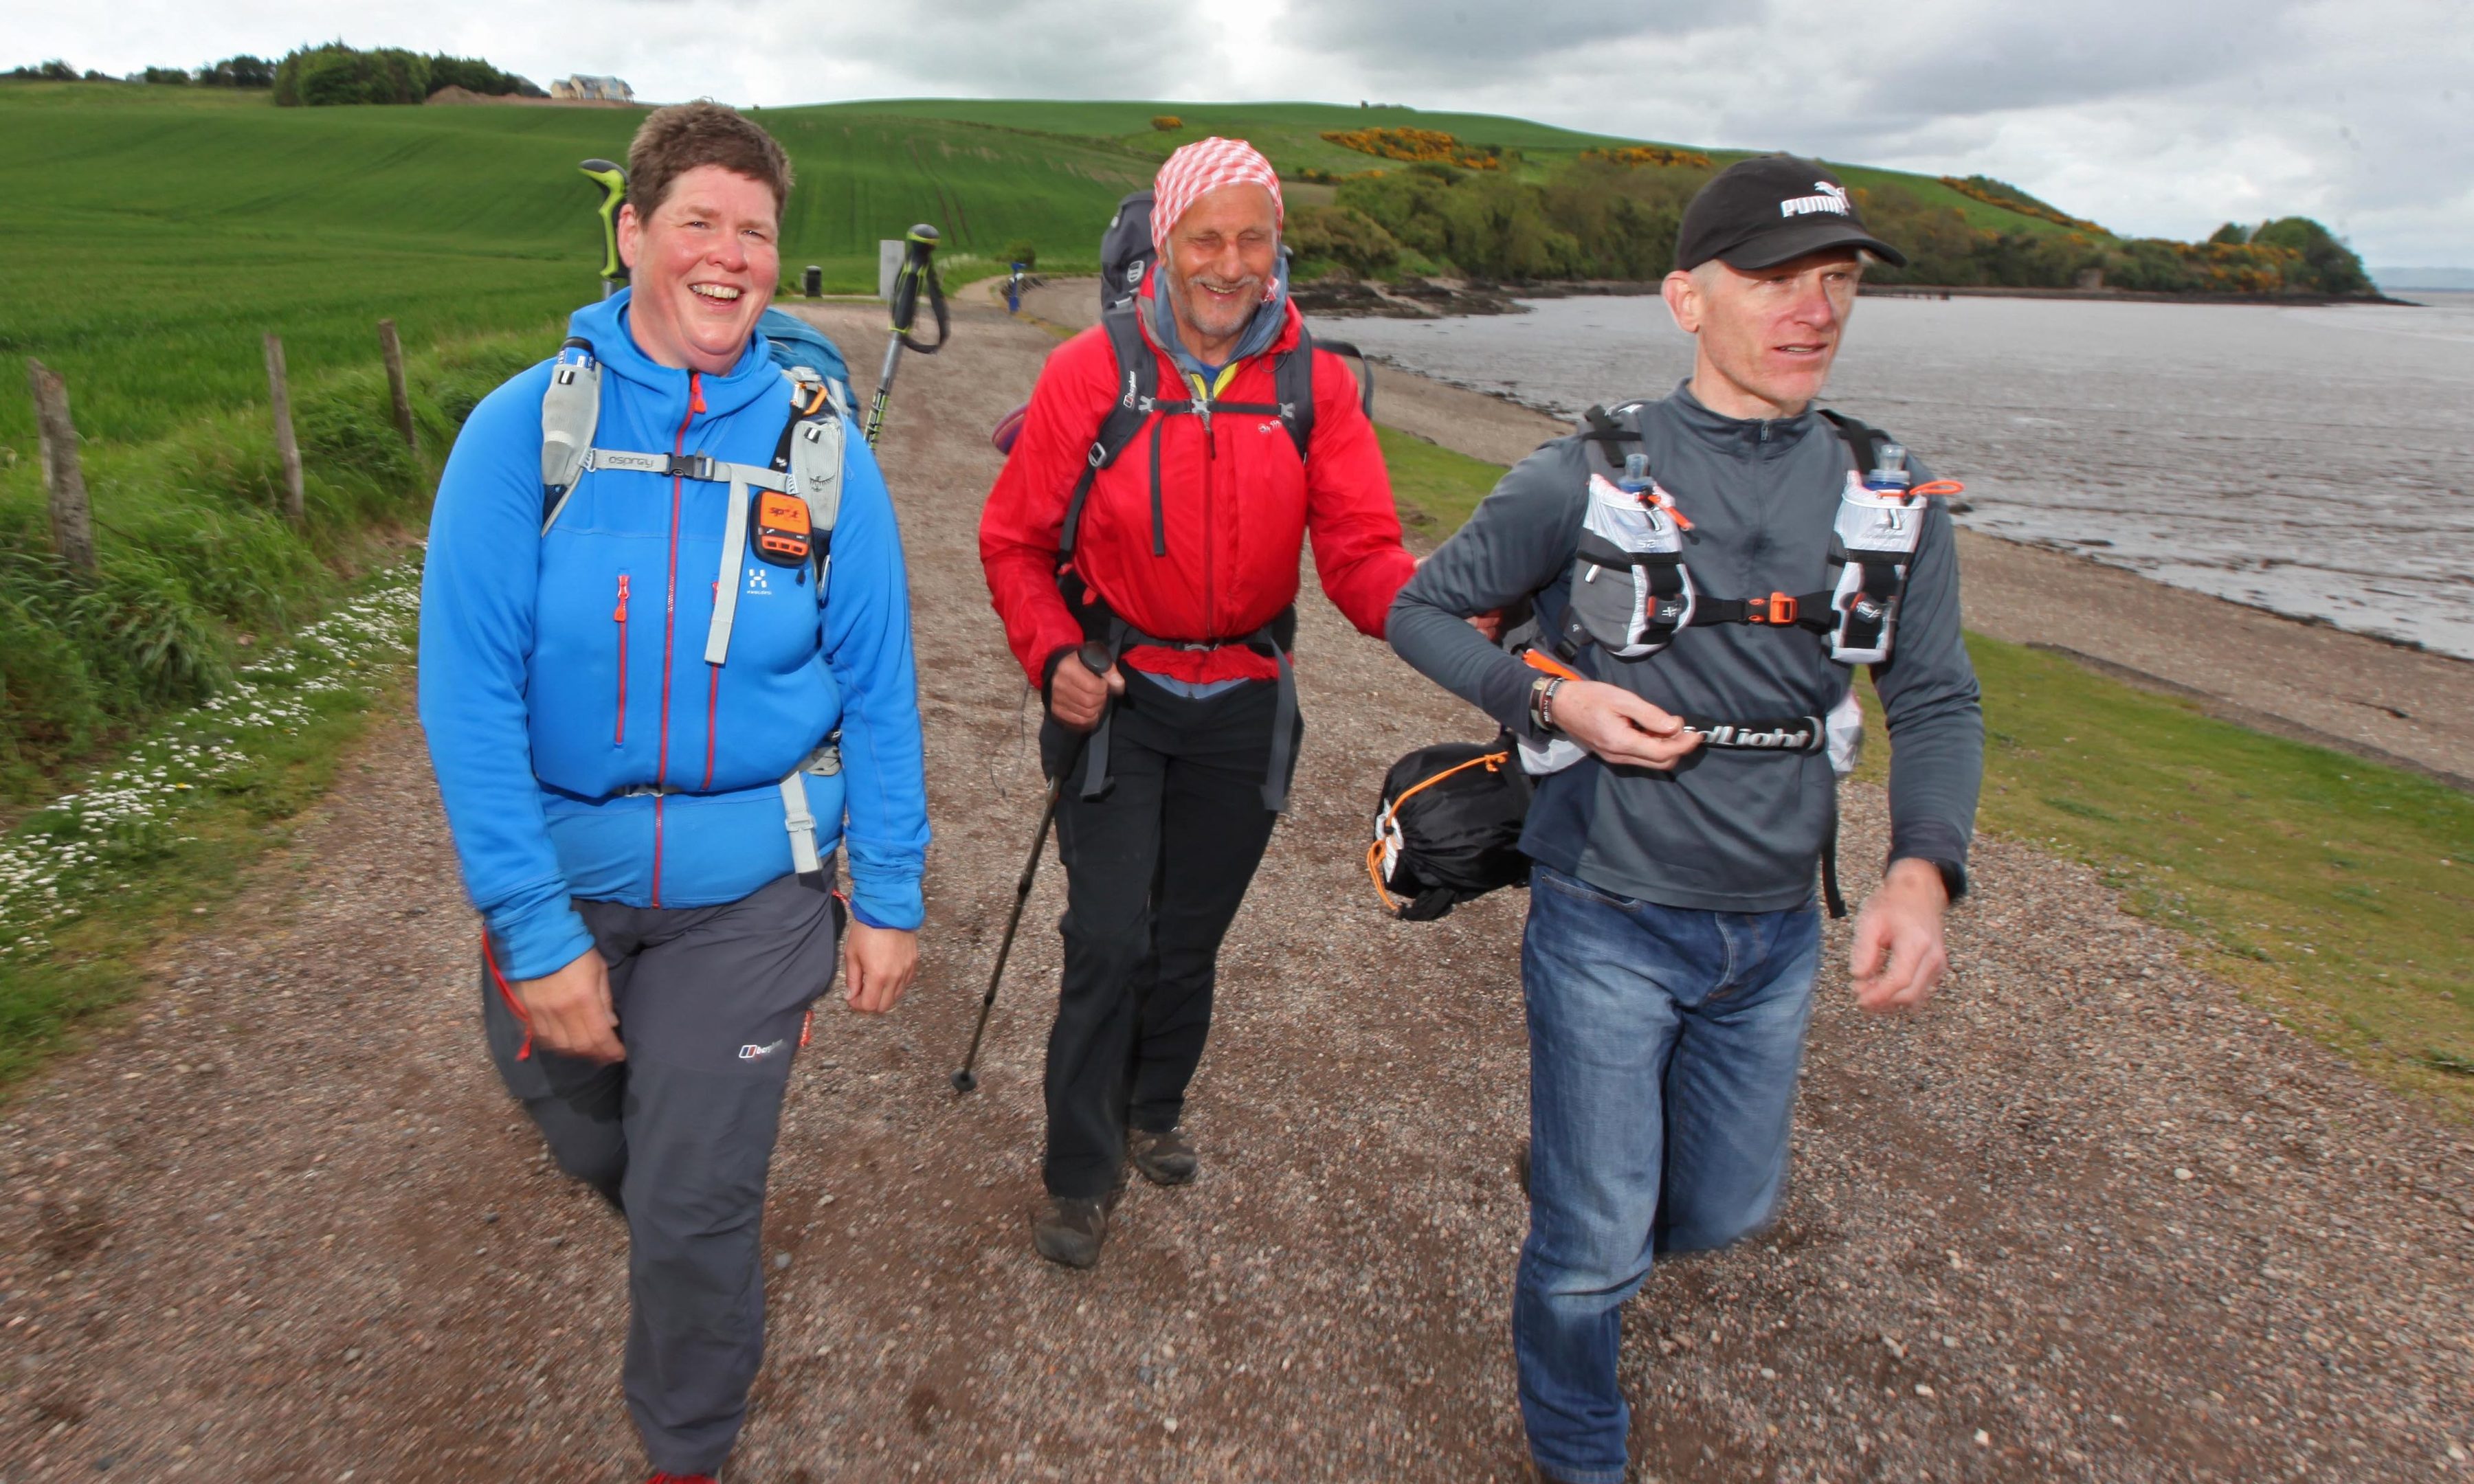 Michael Anderson approaches Wormit acompanied by daughter-in-law Nina Smirnoff and volunteer guide Kristian Delacour.